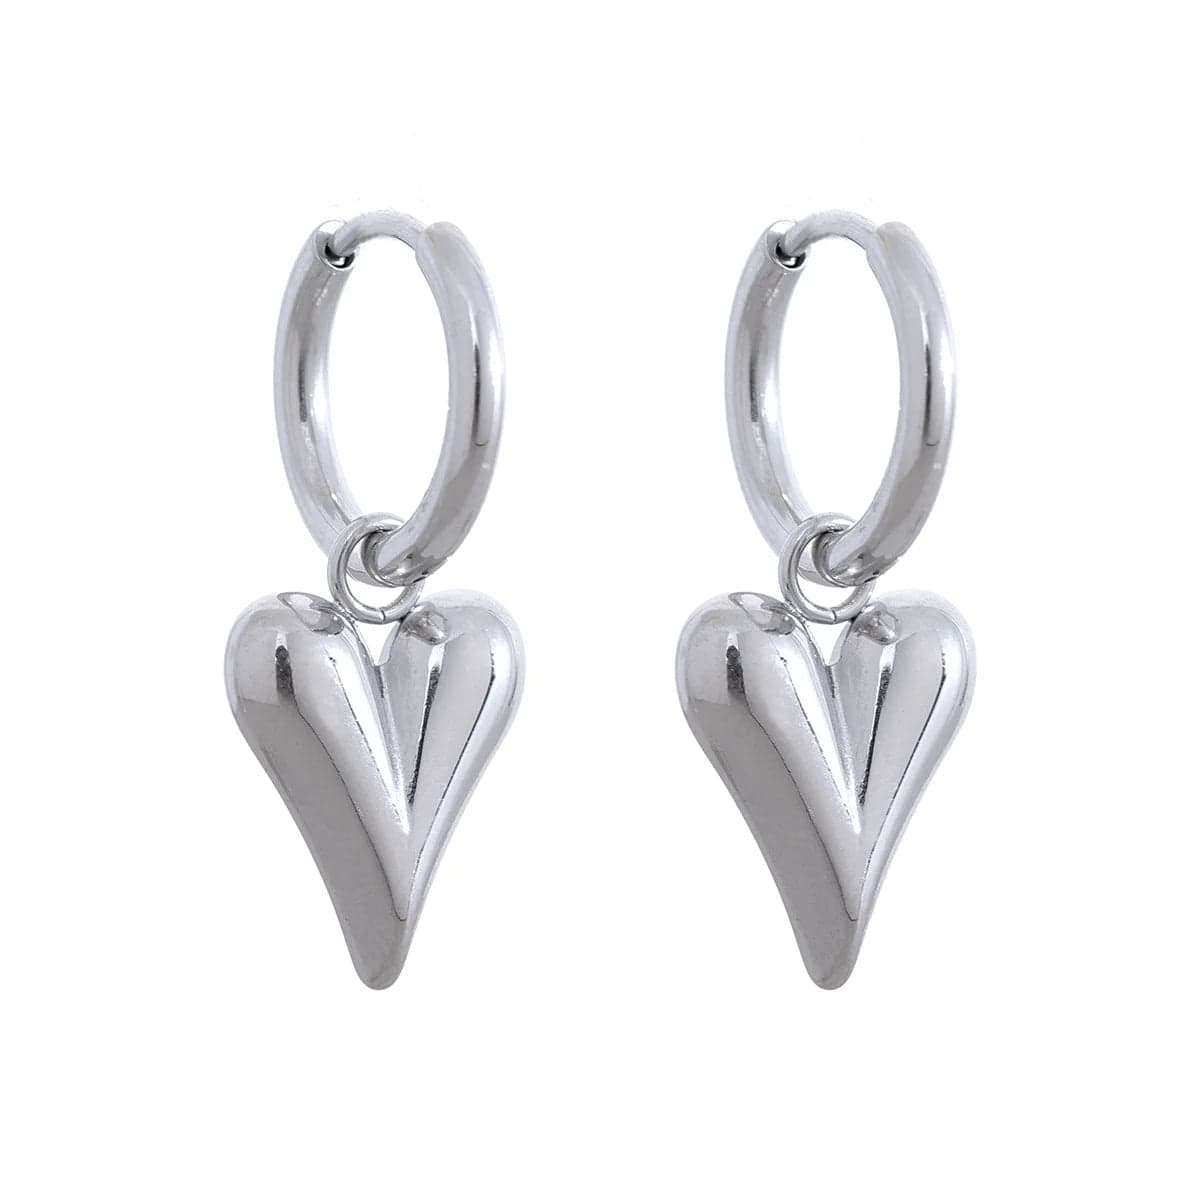 Opes Robur SILVER HEART HOOPS